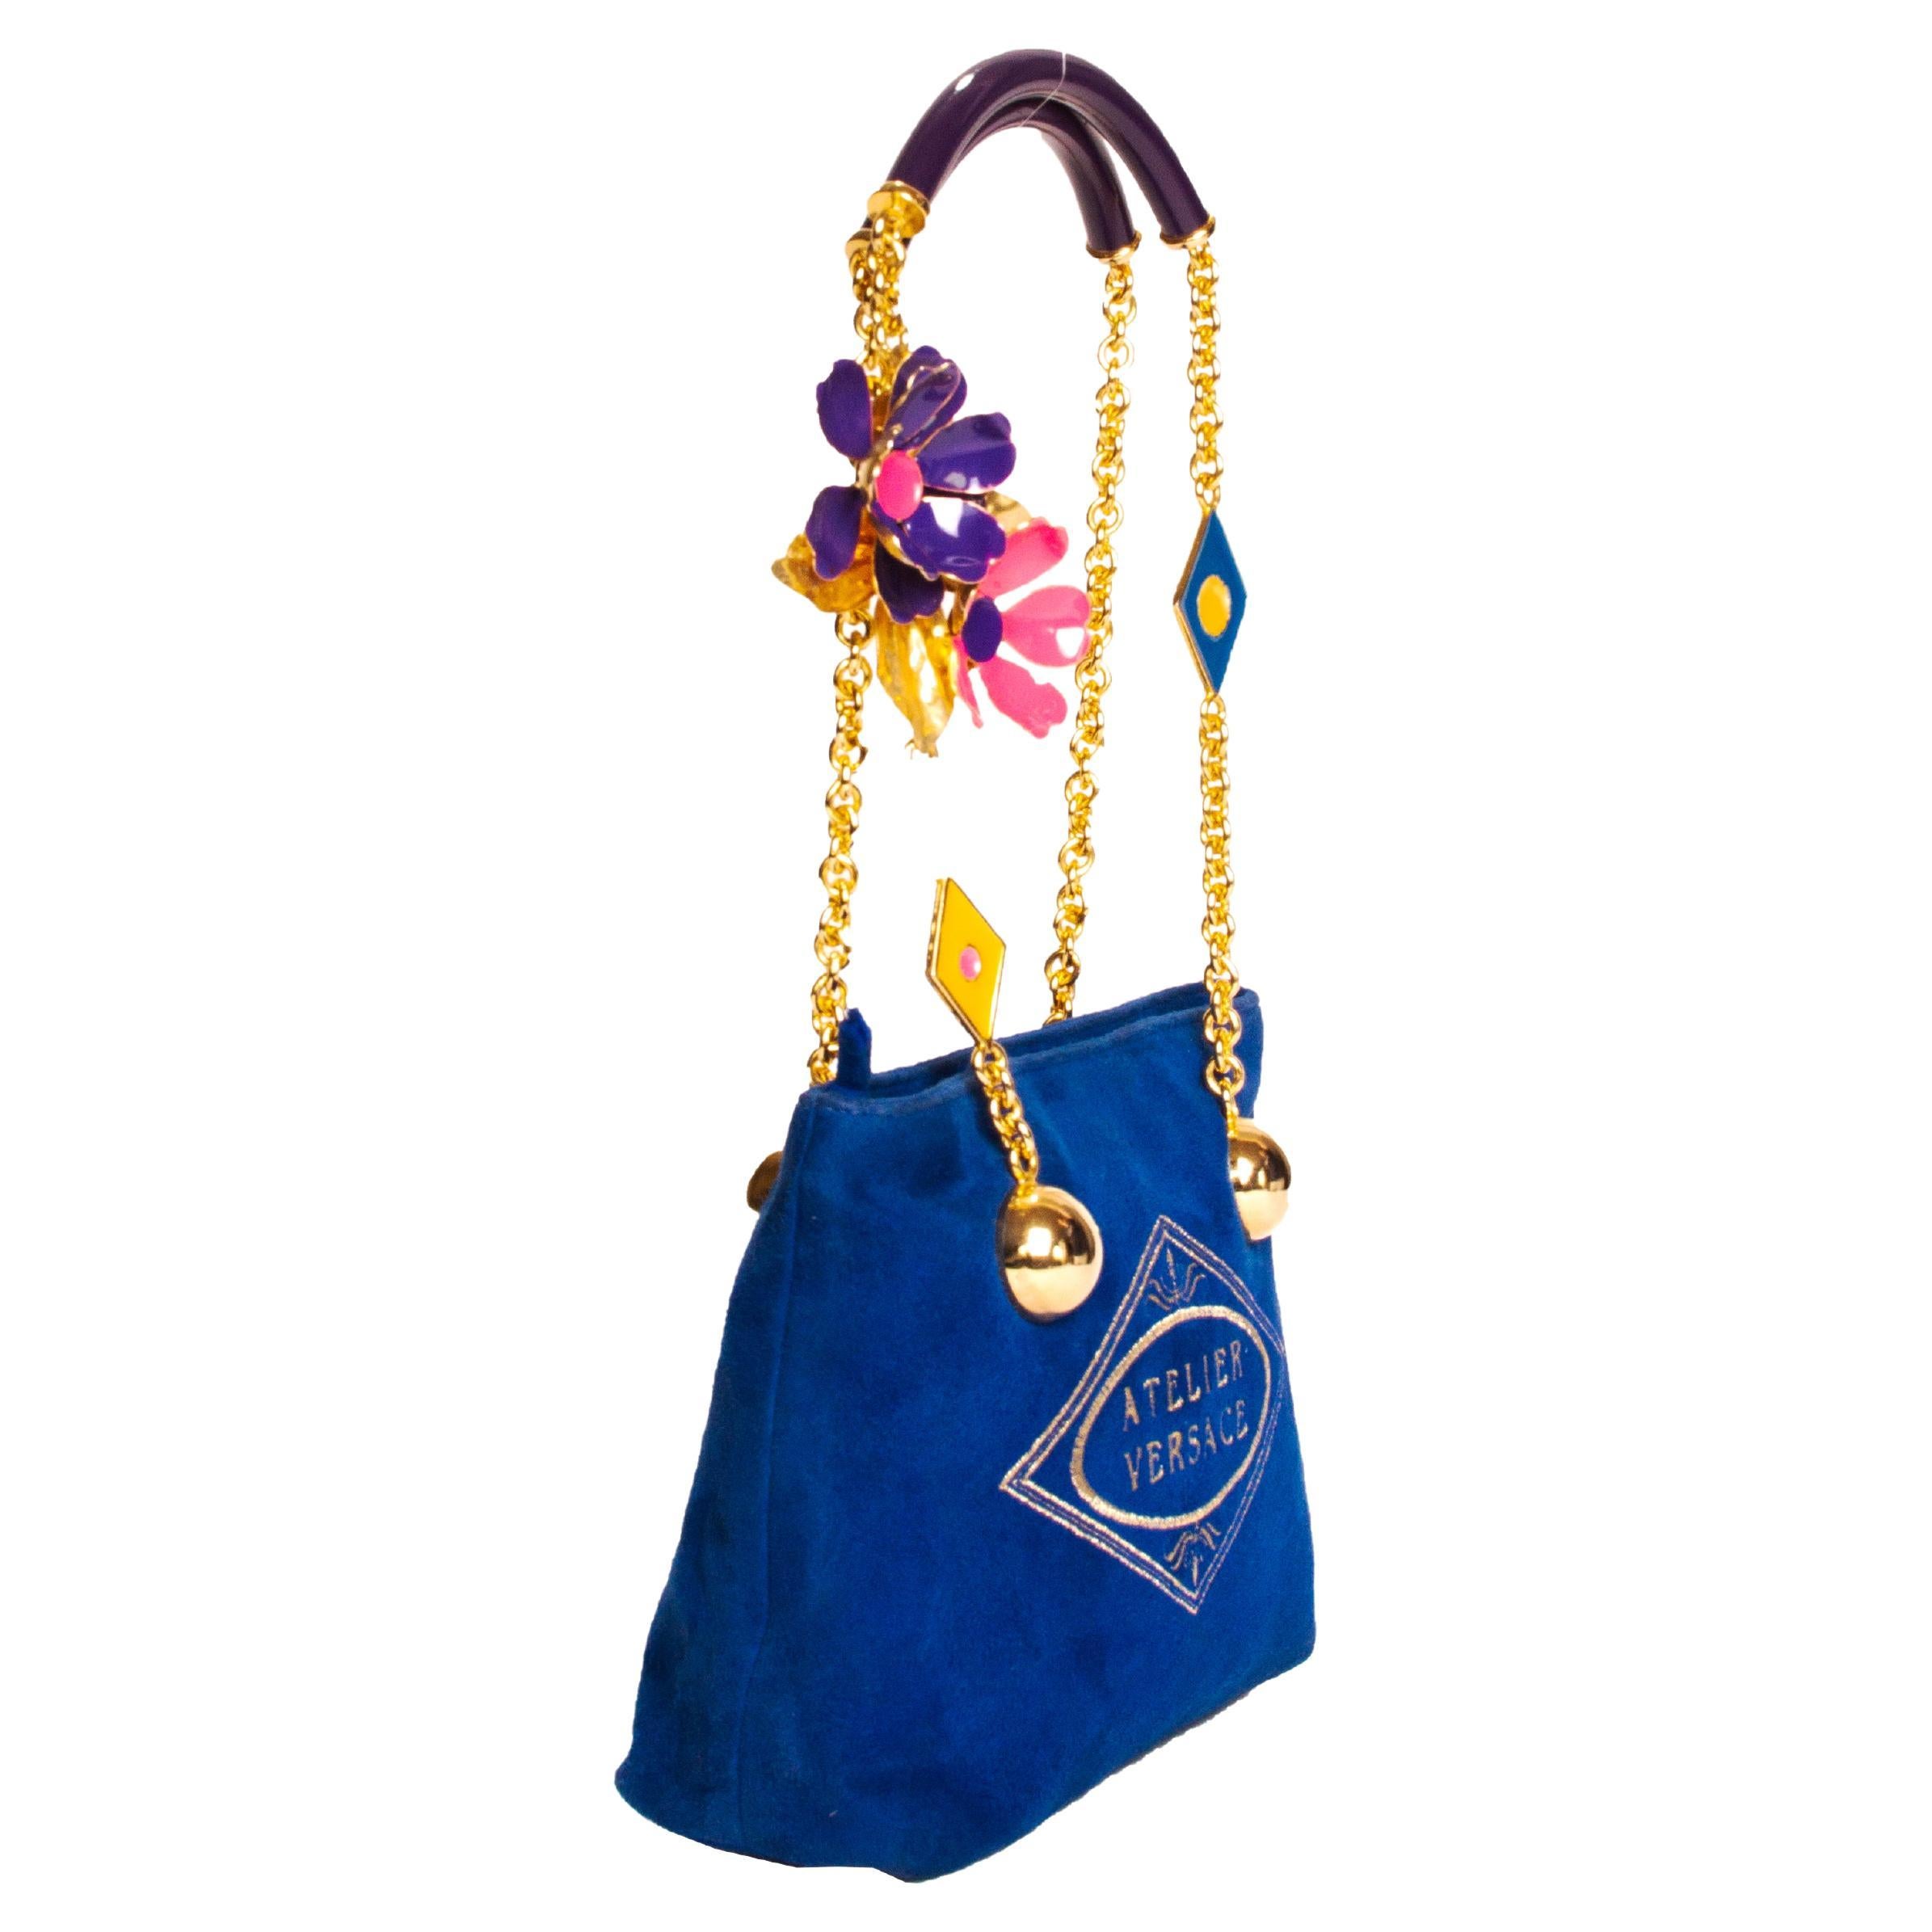 From the Spring/Summer 1991 collection, this bag designed by Gianni Versace features the 'Atelier Versace' embellished with gold thread prominently on both sides of the bag. The body of the bag is constructed with a bright royal blue faux suede. The